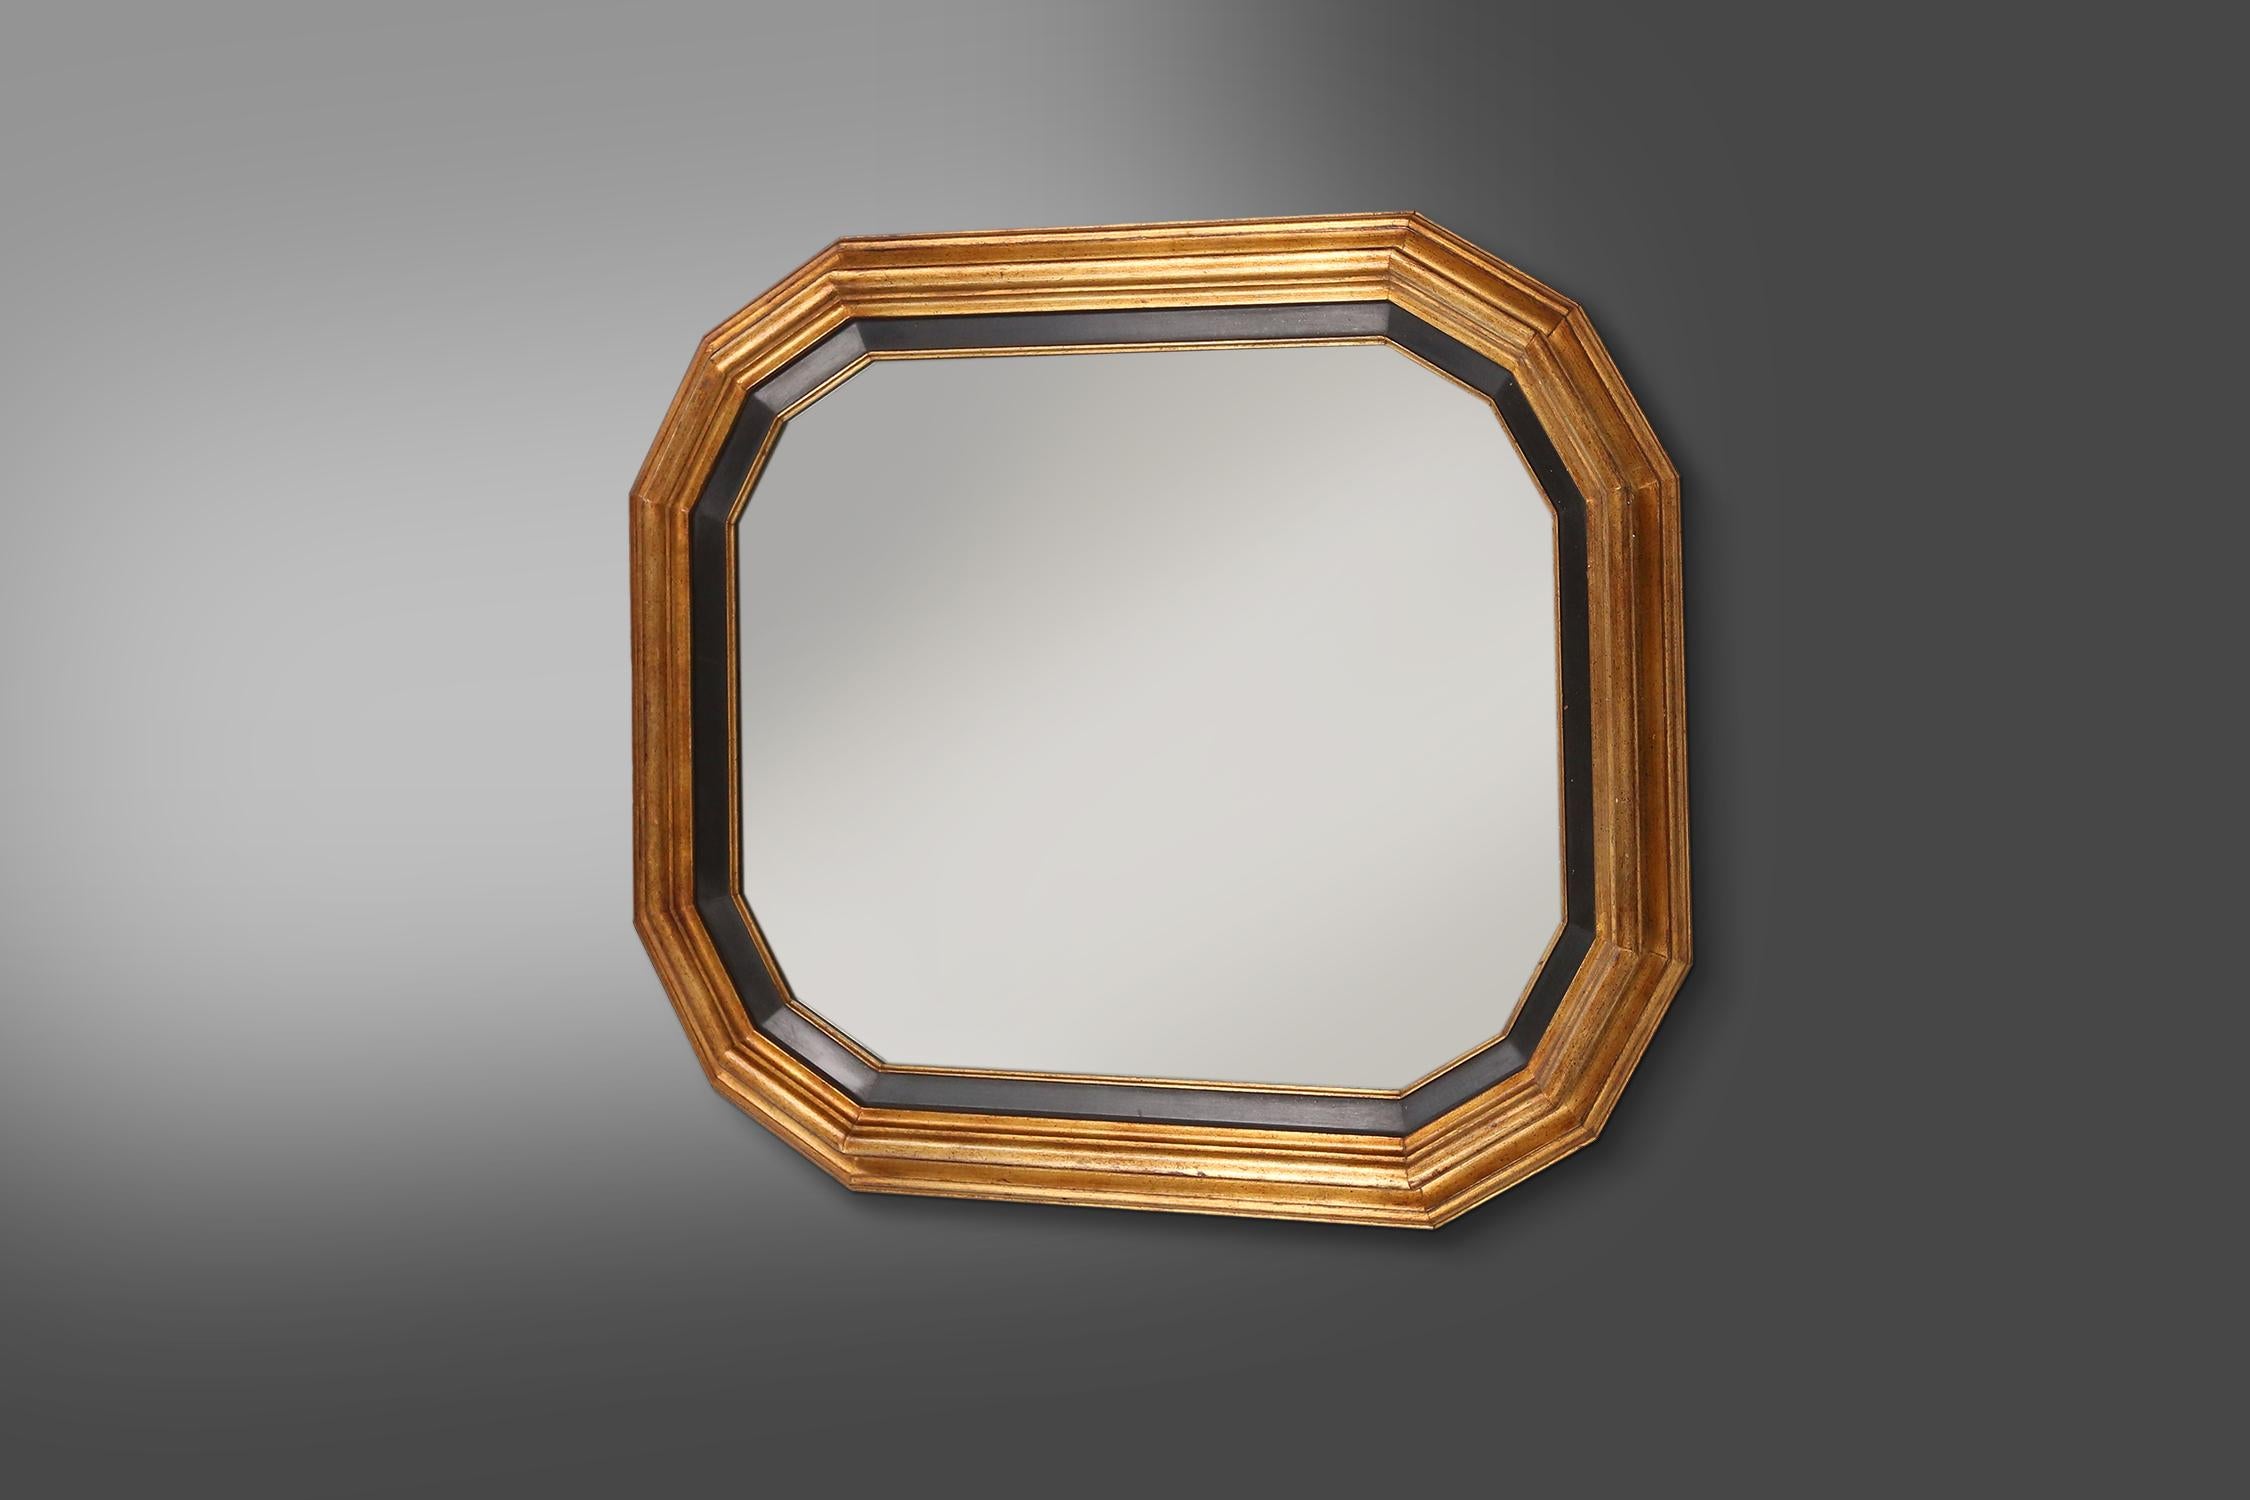 Belgium / 1950s / gold and black mirror / resin / mid-century / vintage

A large mirror with gold and black frame in elegant lines, Belgium, made in the 1950s. Crafted in resin, this mirror exudes luxury and elegance. The gold frame adds a touch of